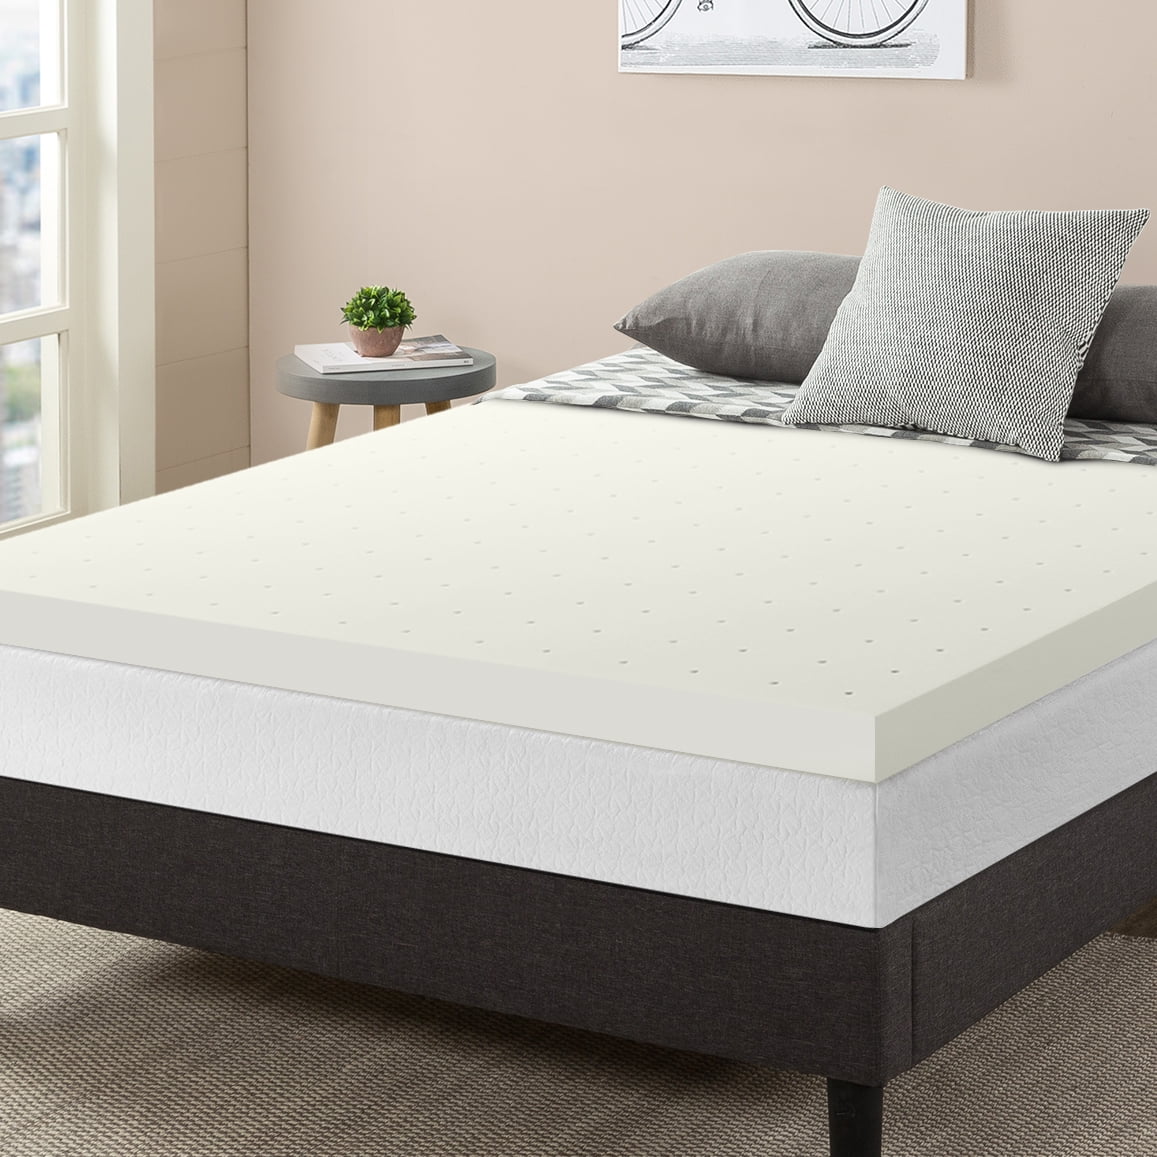 Details about   Twin-XL Size Spa Sensations 4" Memory Foam Mattress Topper with Theratouch 